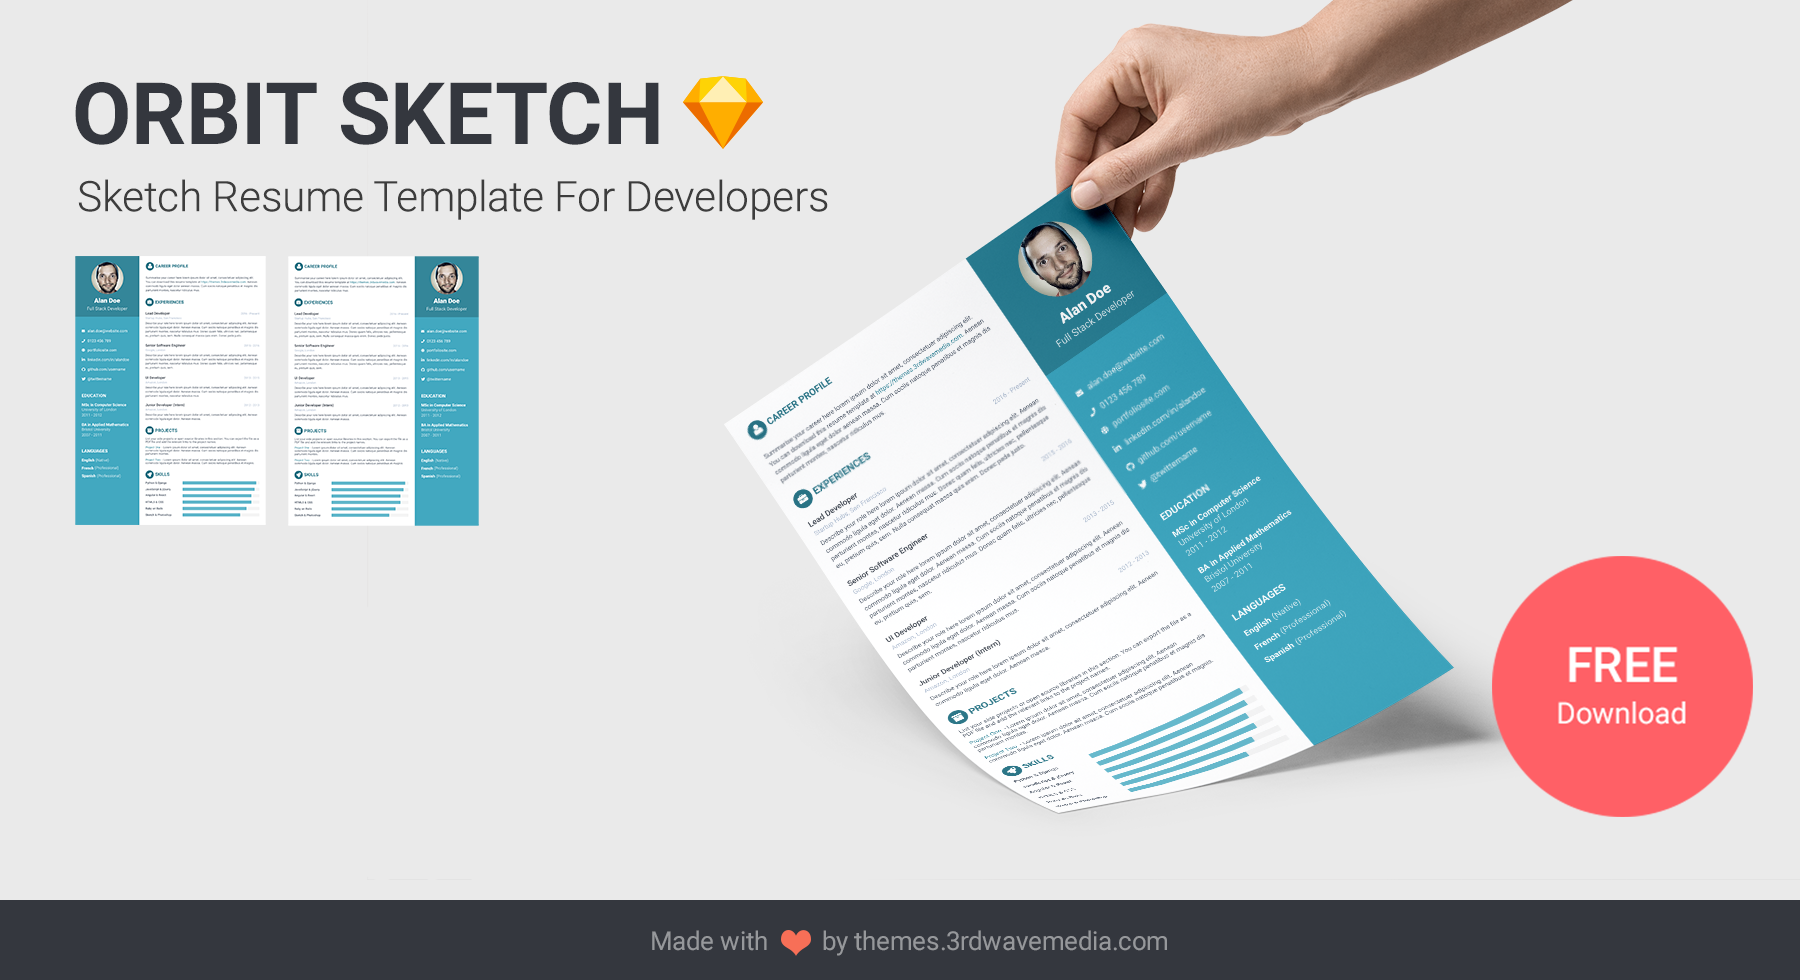 Sketch Resume Template for Developers